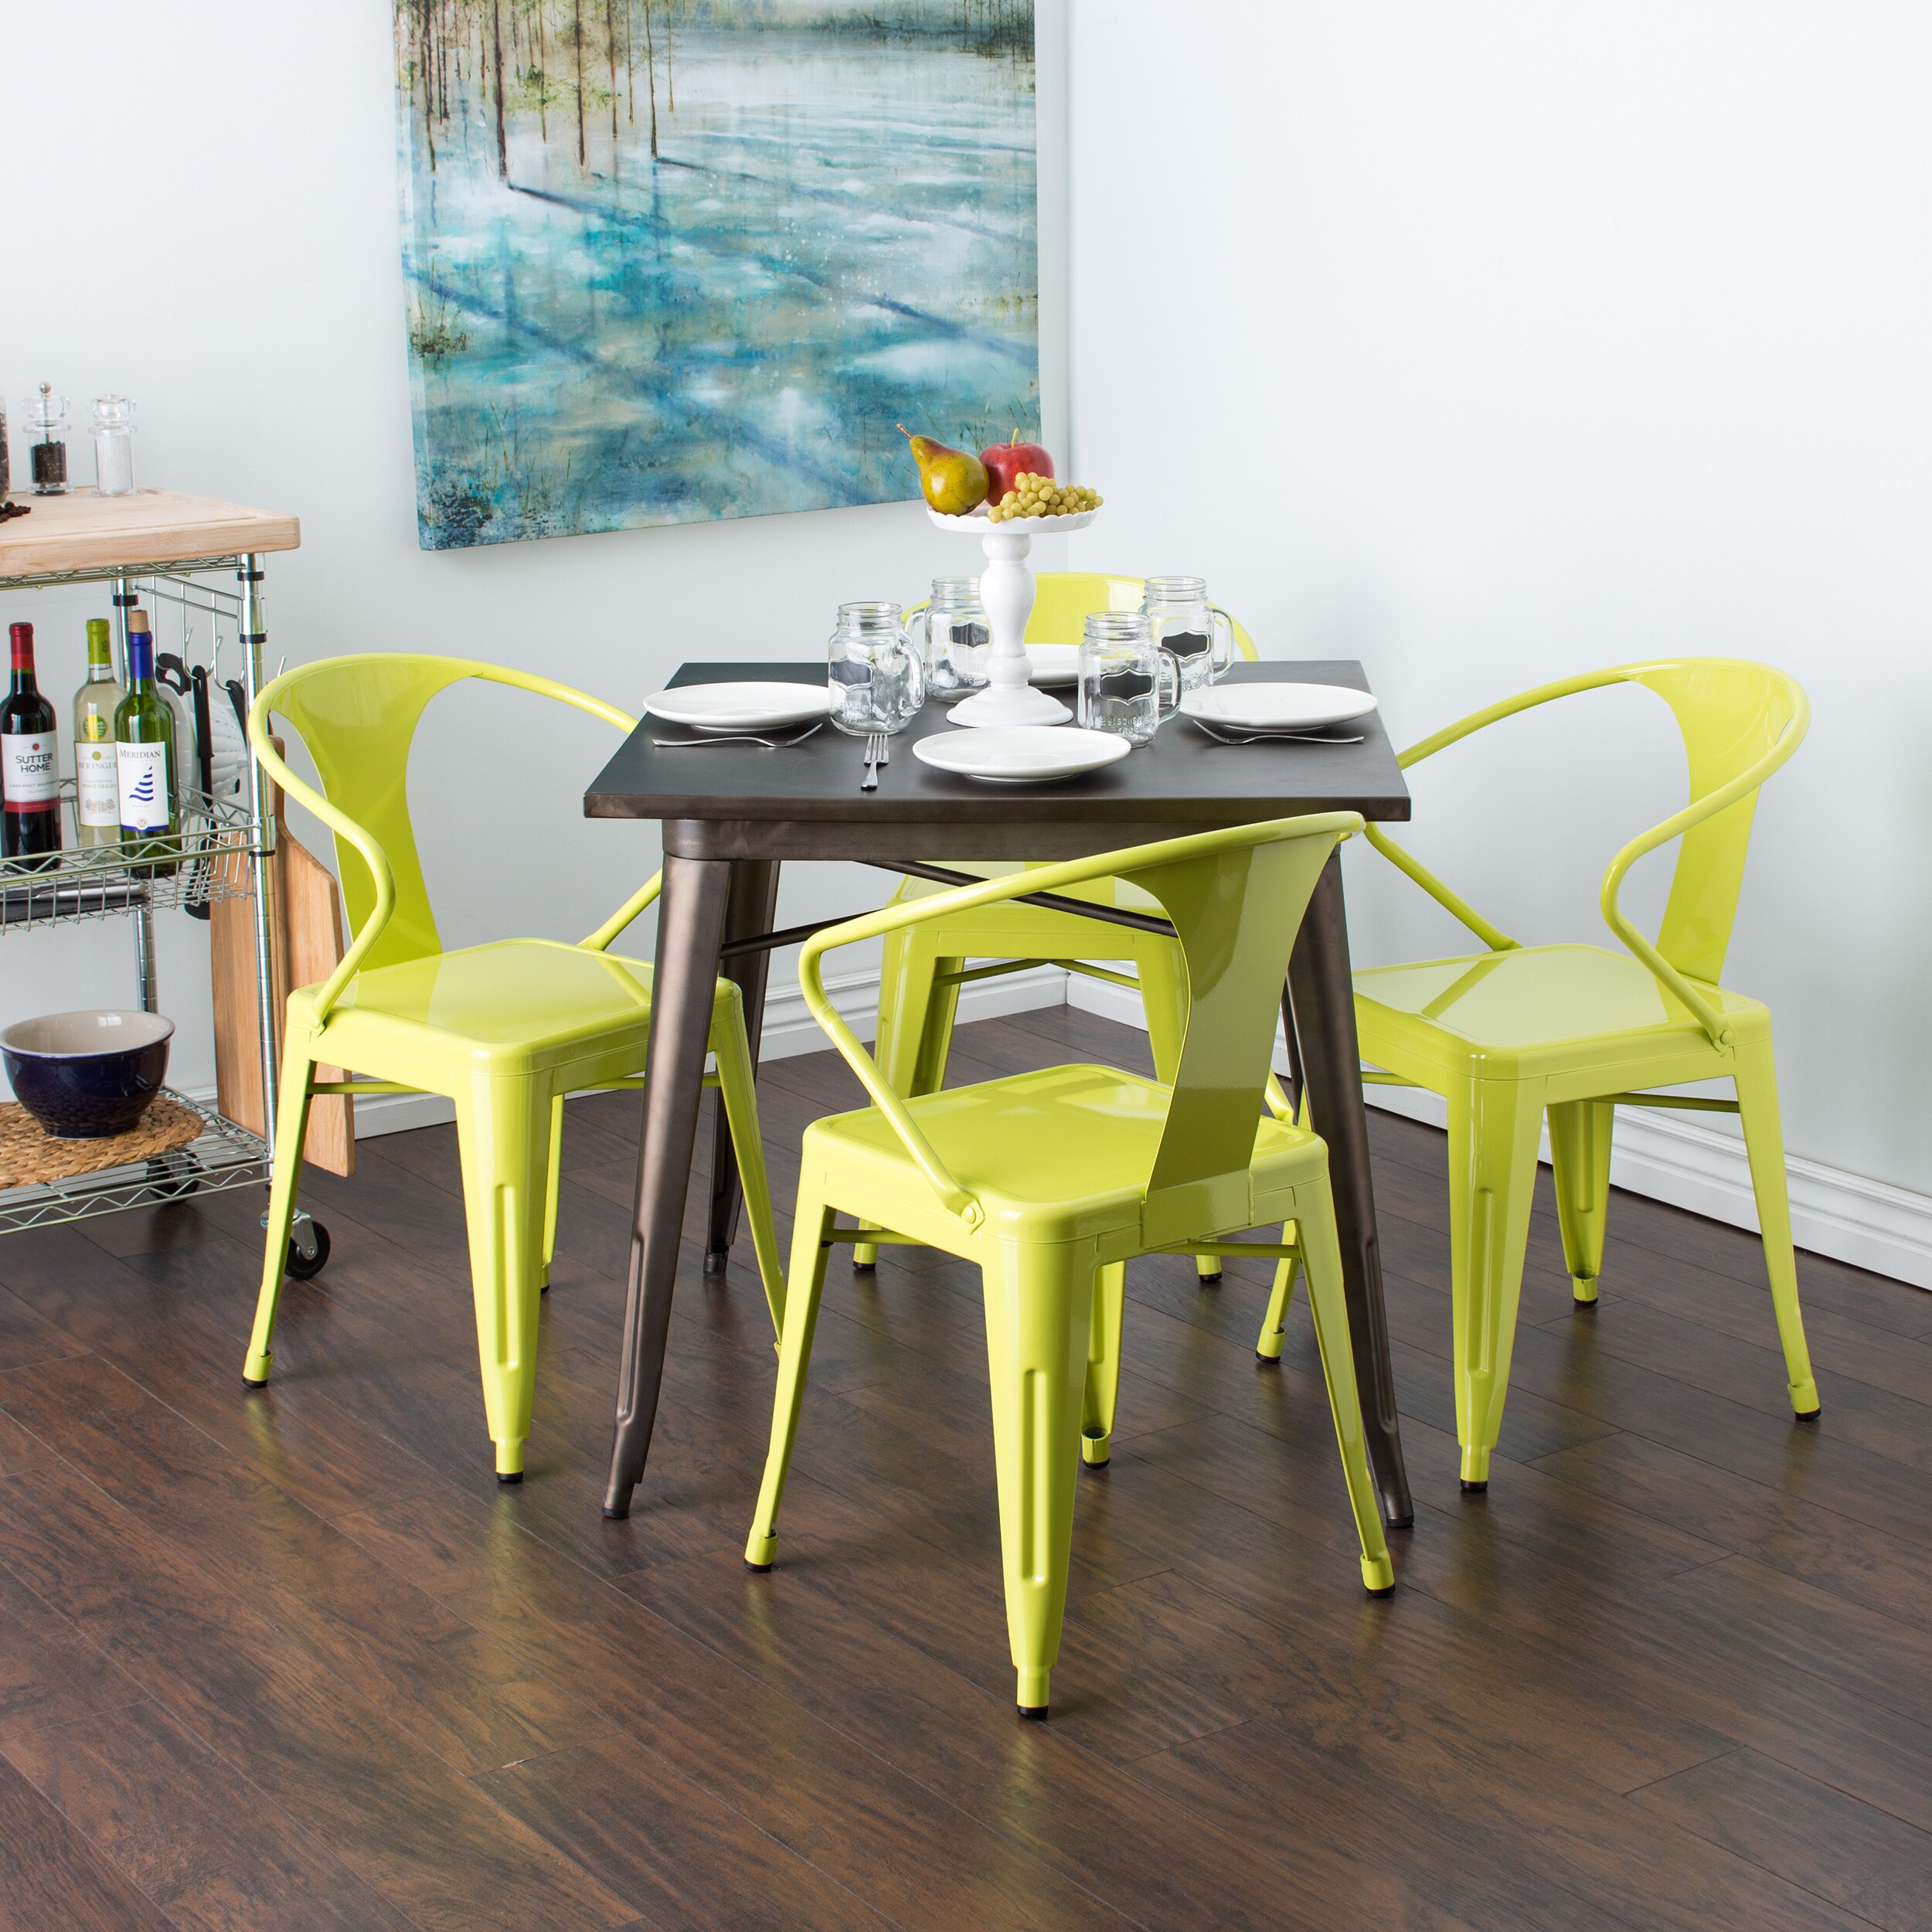 Limeade Tabouret Stacking Chairs (Set of 4) Today $199.99 4.0 (10